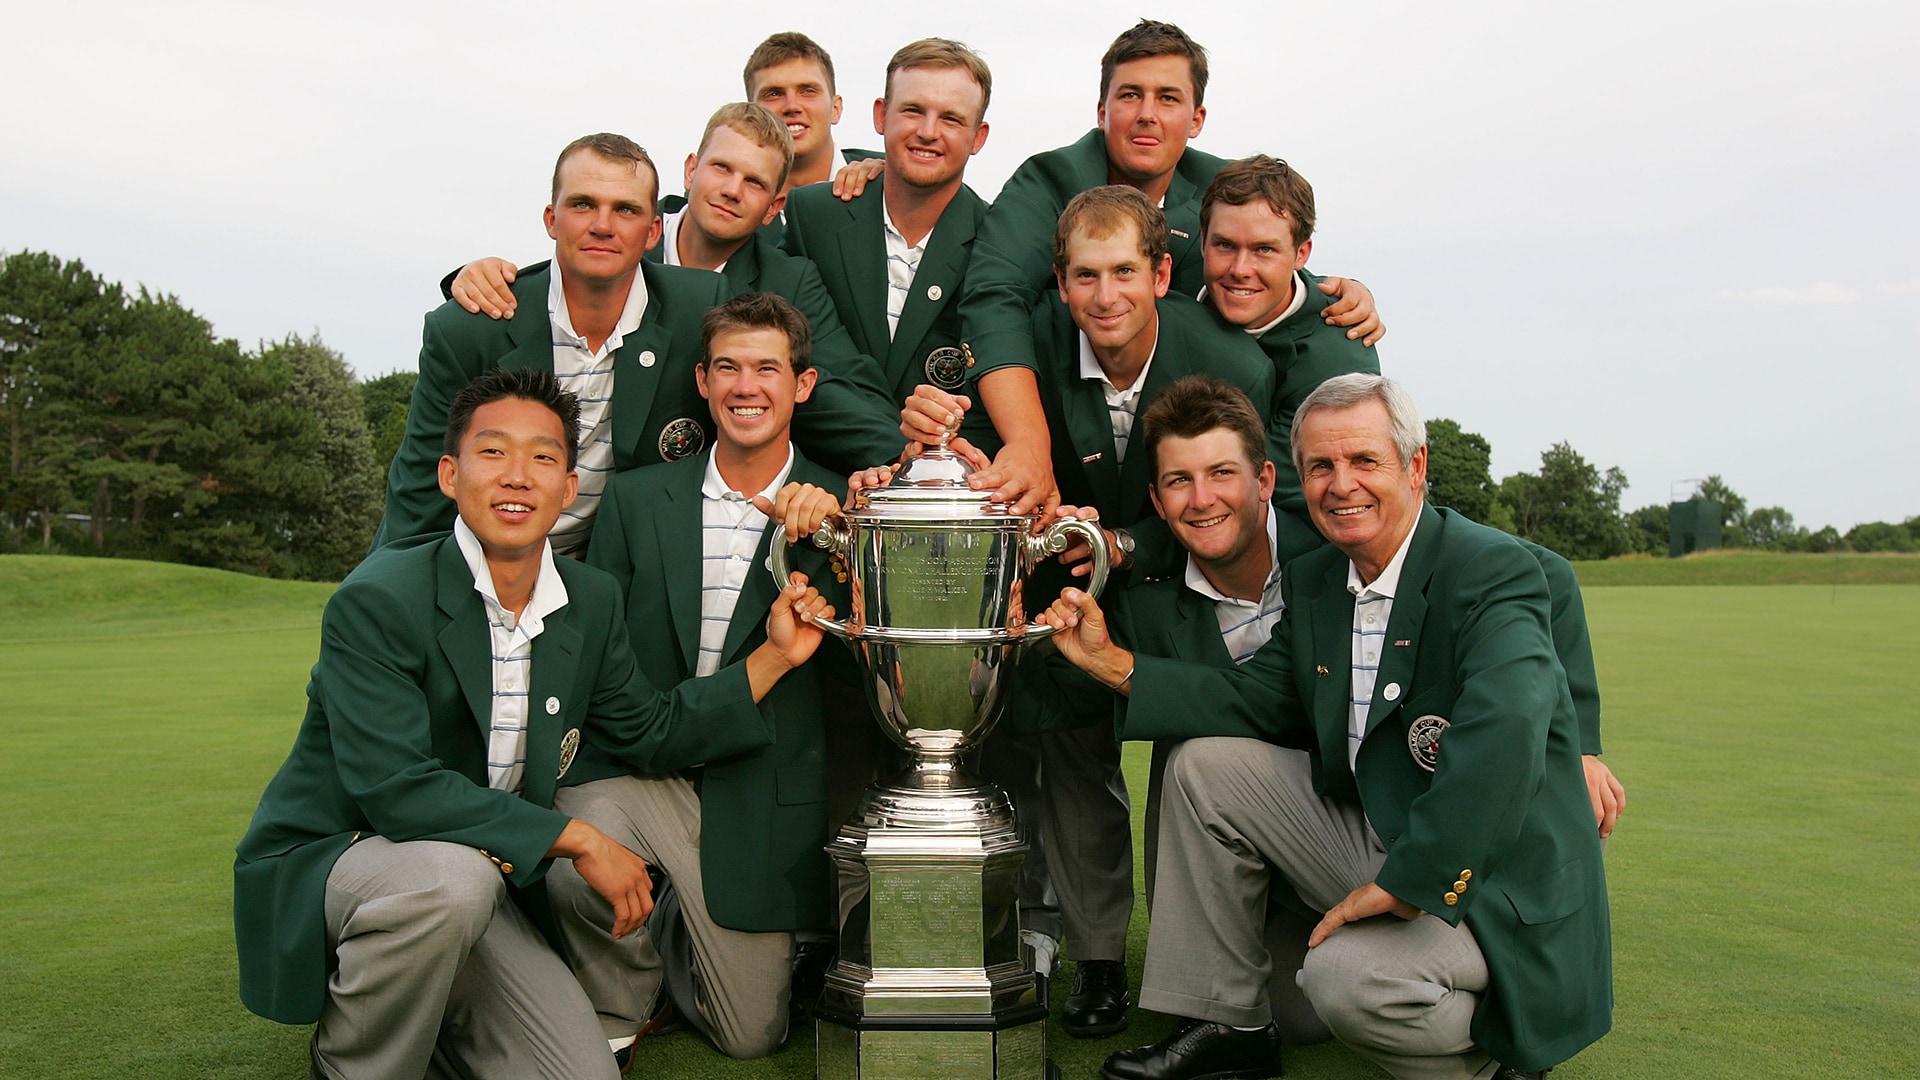 With Chicago GC getting another Walker Cup, let’s look back on 2005 match